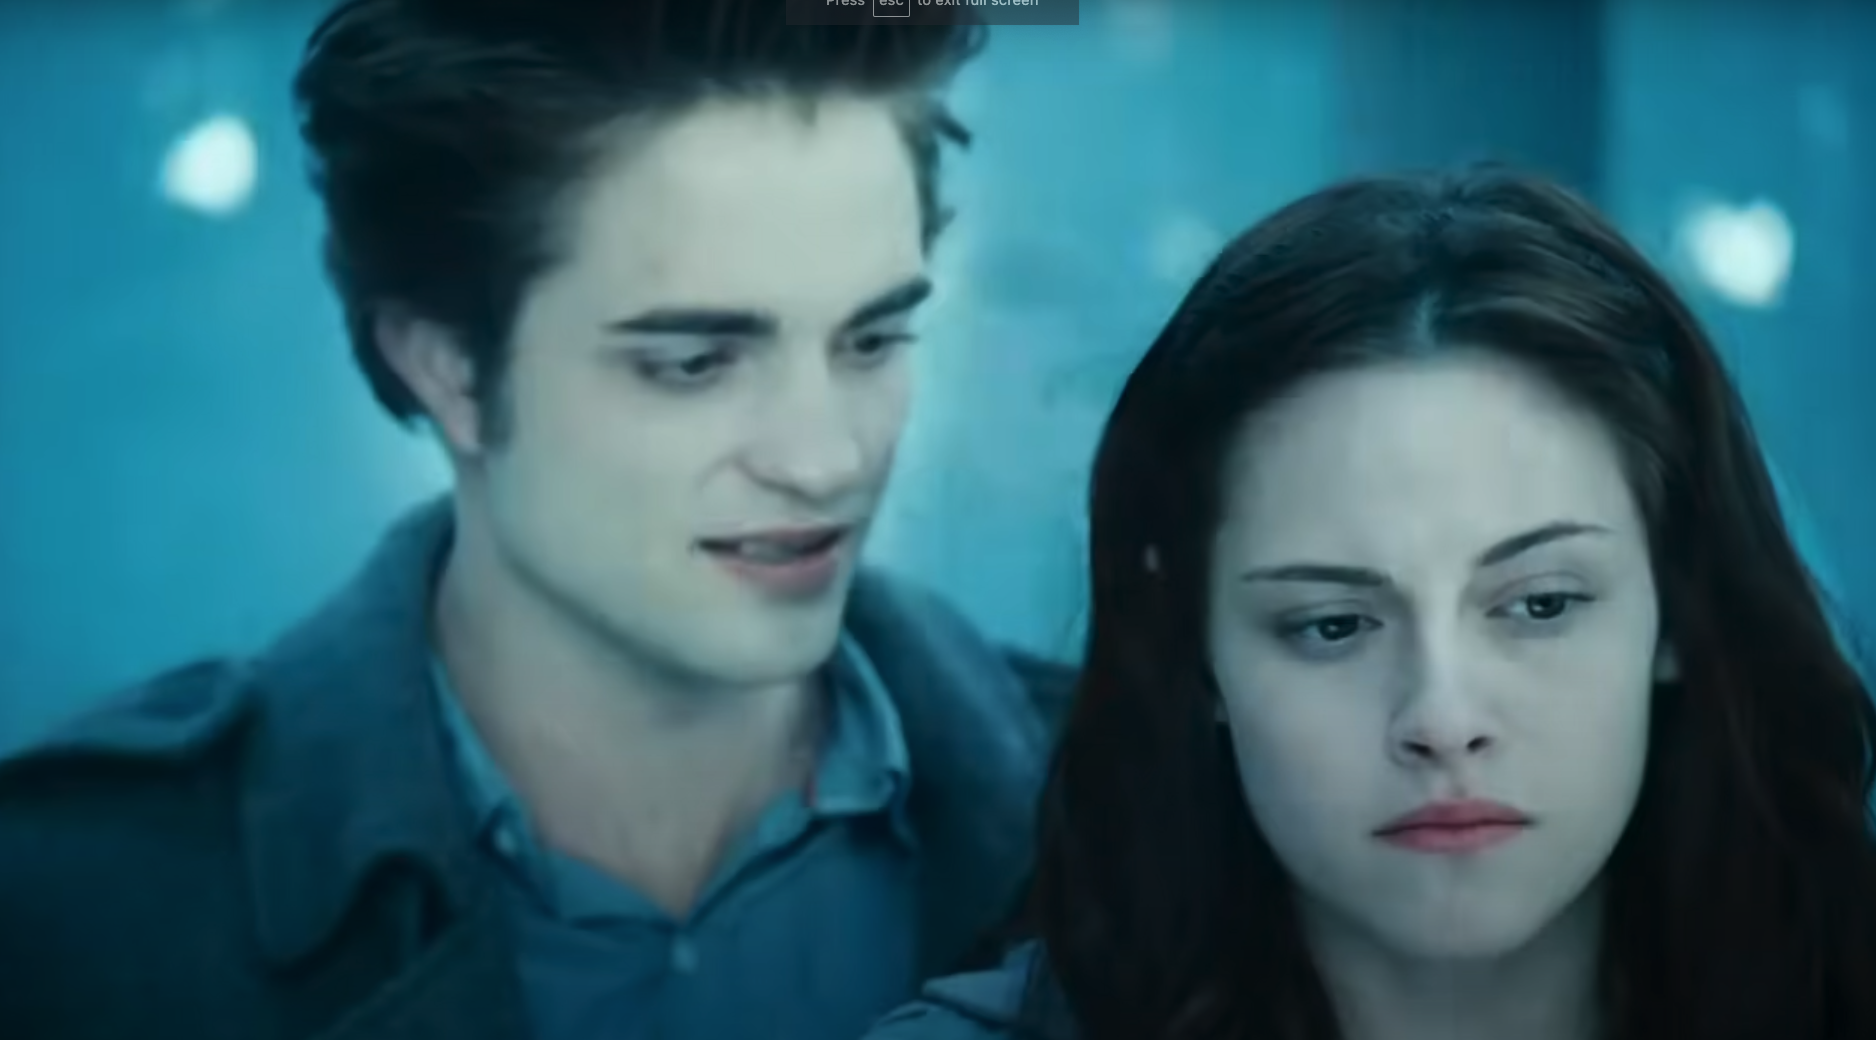 Edward and Bella, characters from Twilight, stand close with intense expressions